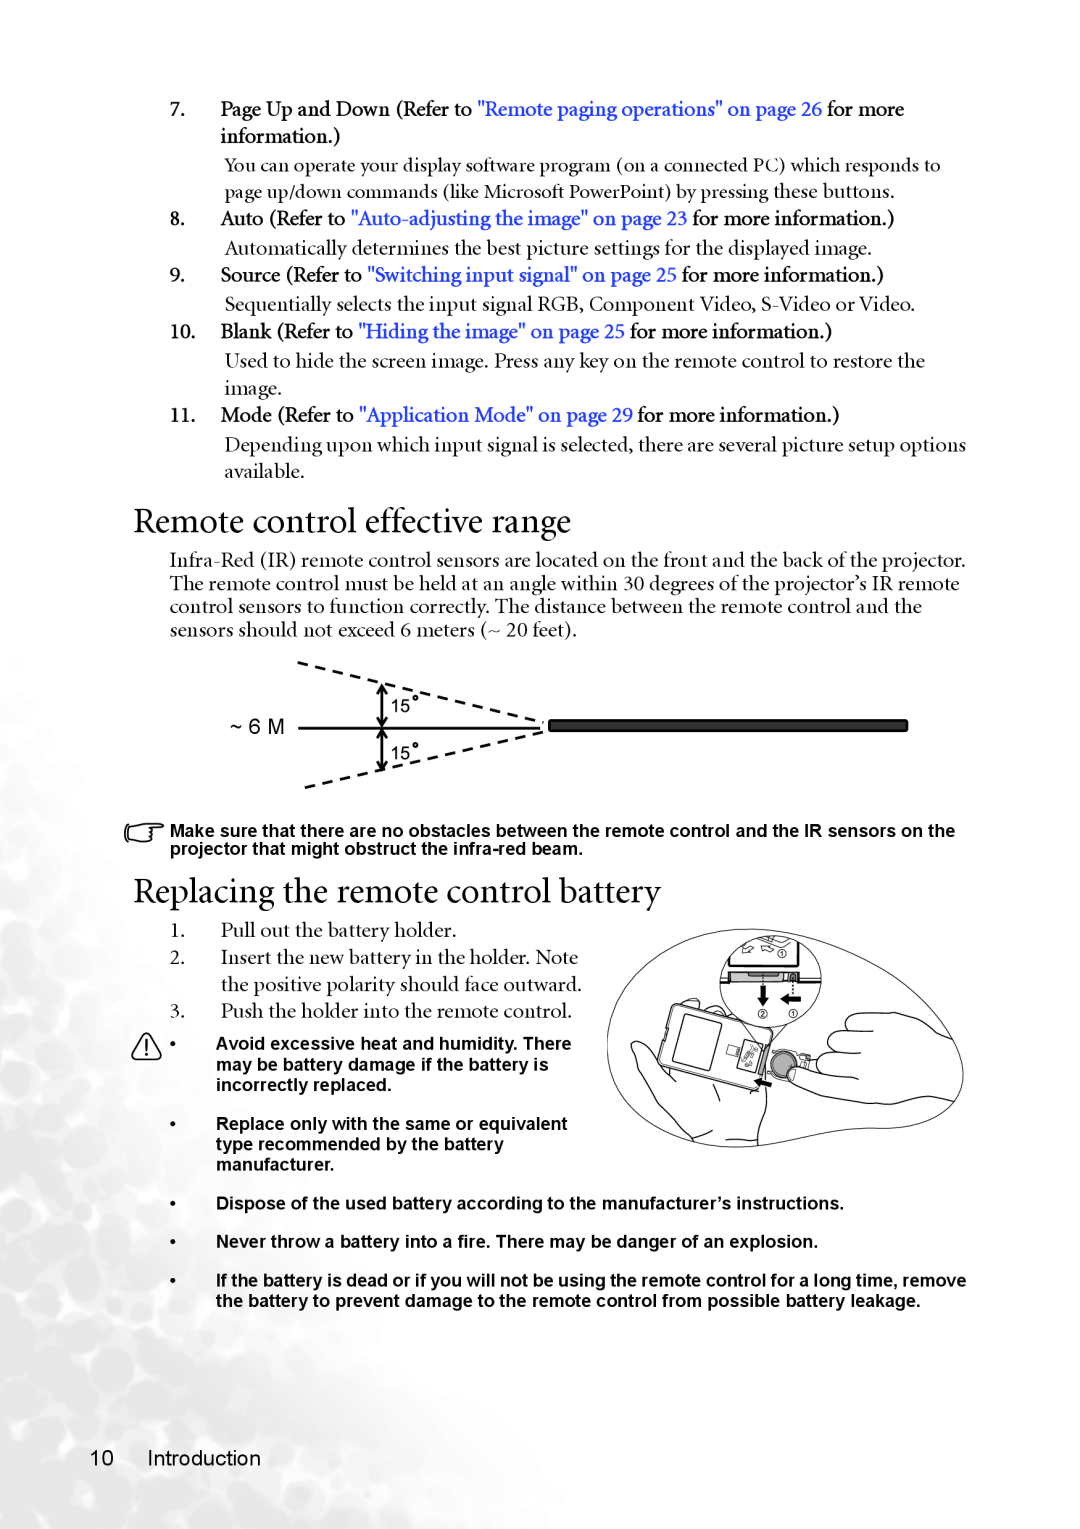 BenQ MP620p user manual Remote control effective range, Replacing the remote control battery 